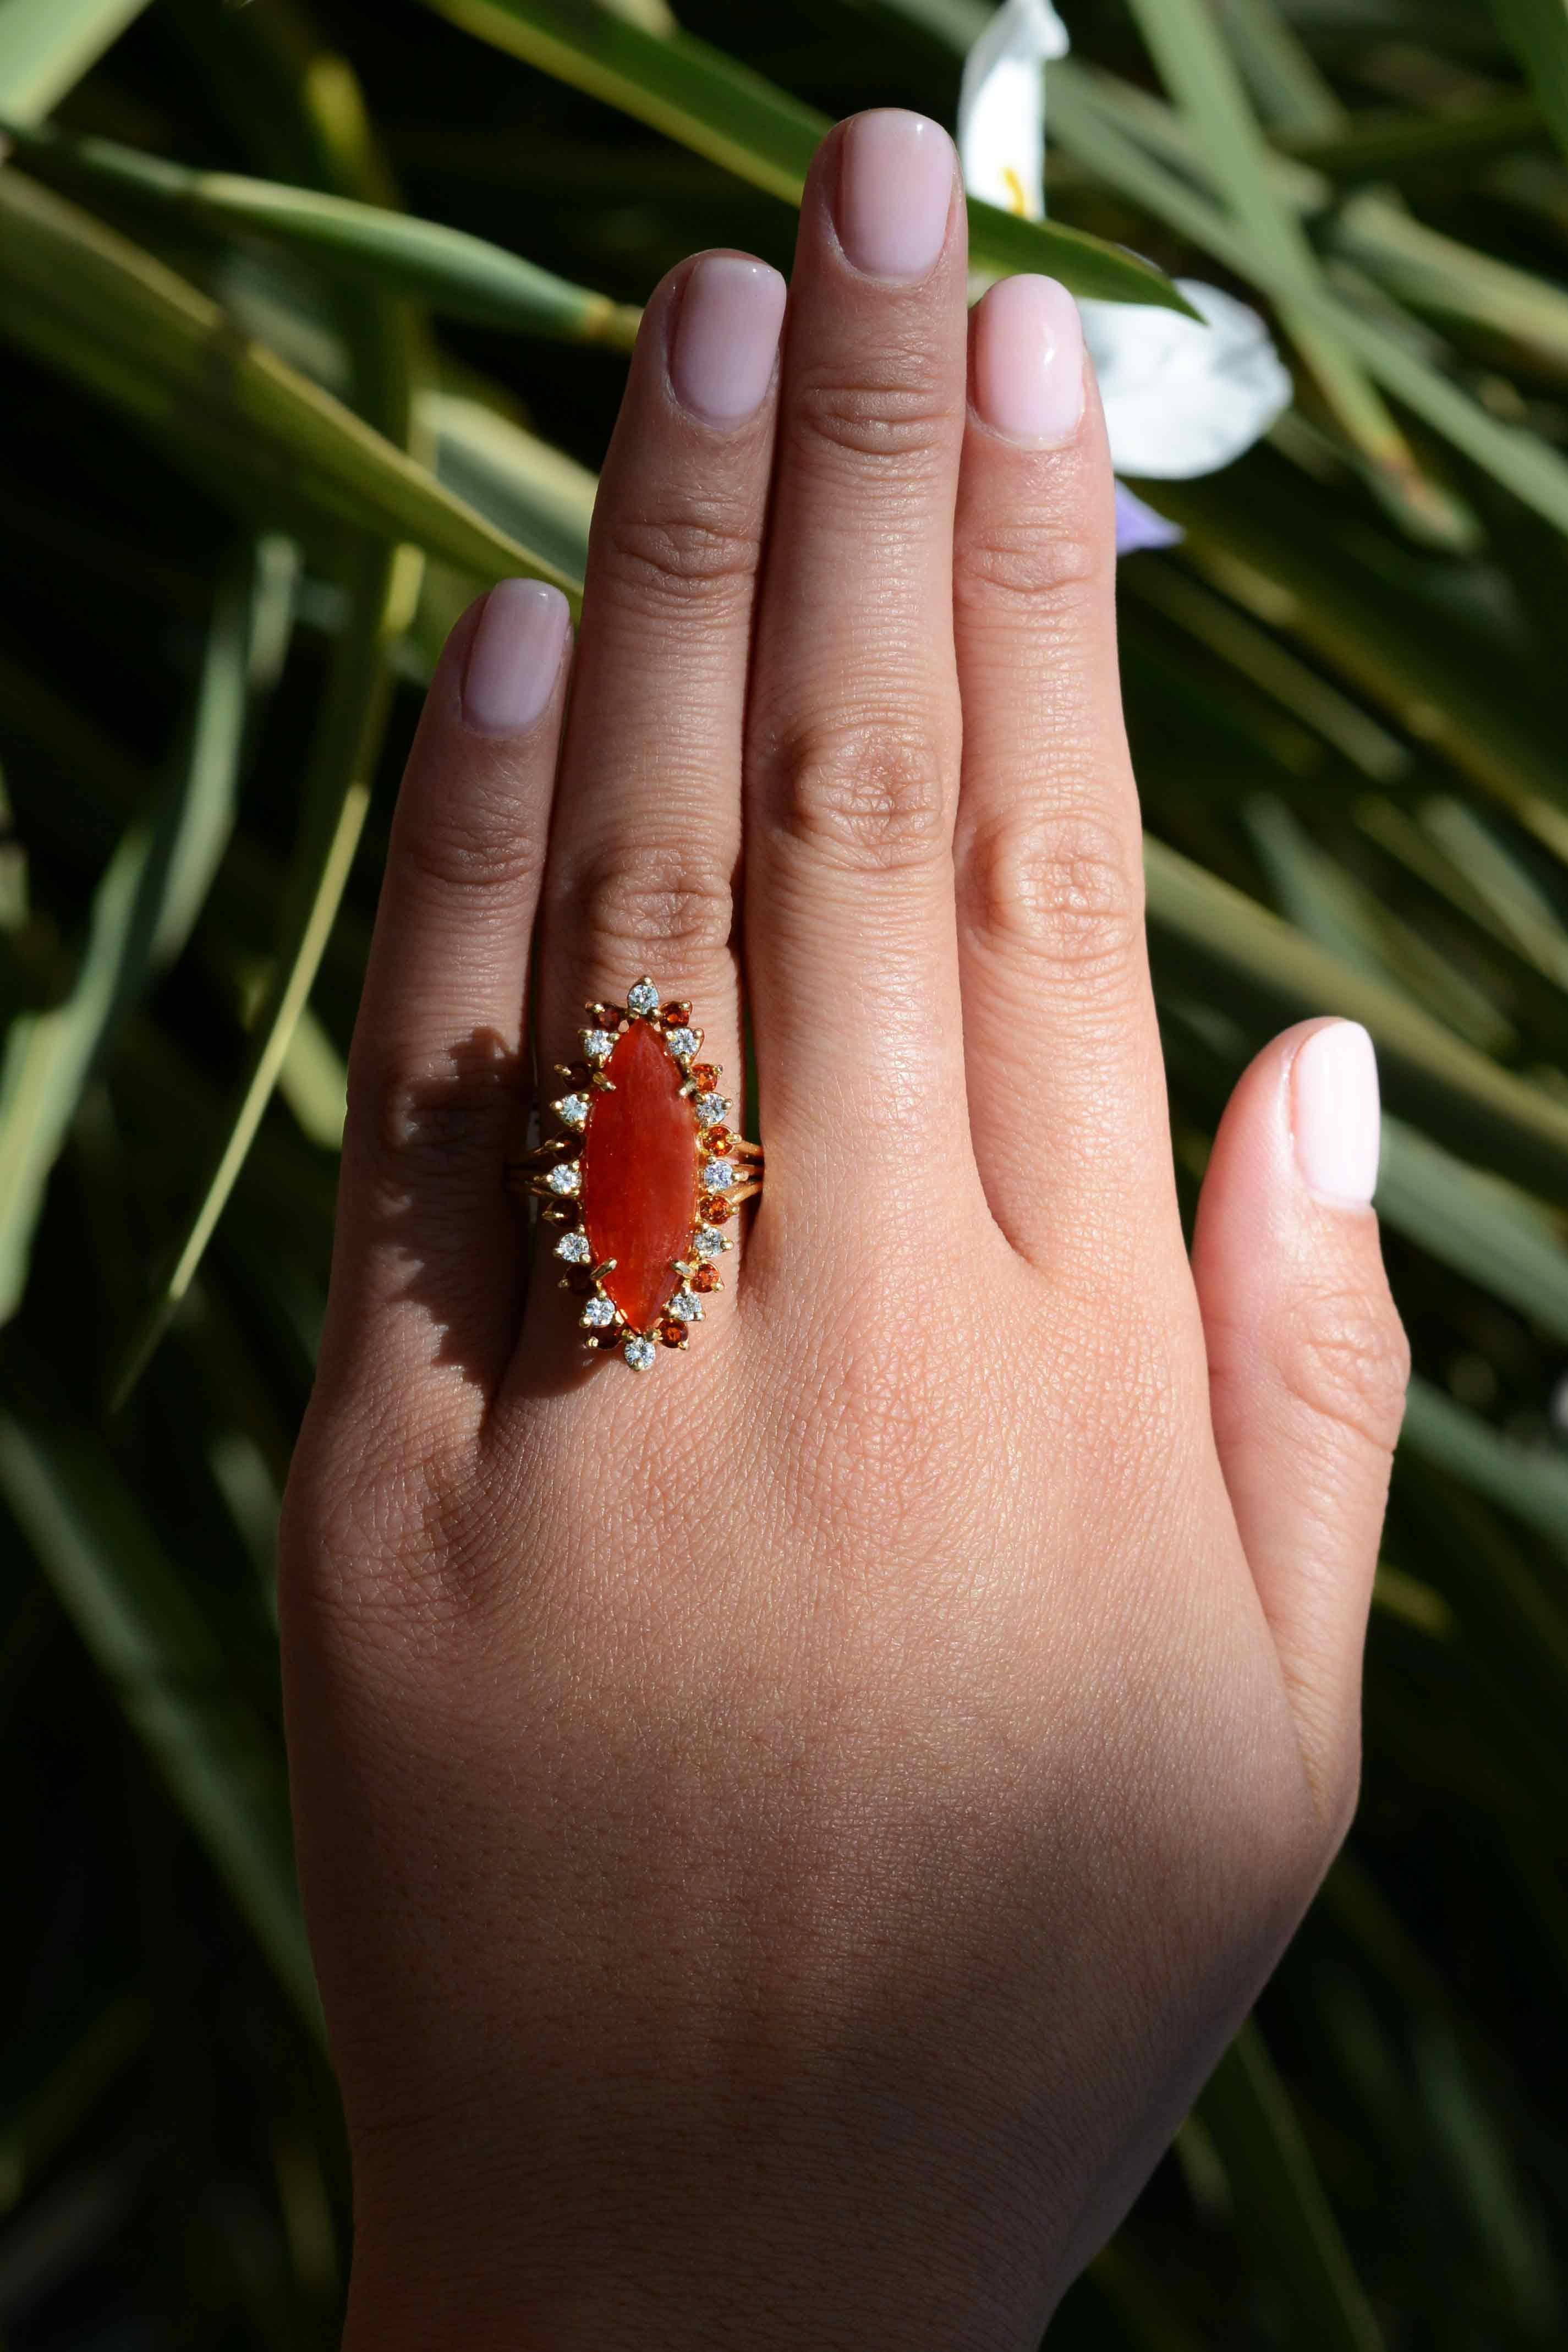 A fiery and affordable cocktail ring with a sizable carnelian showcased as the center gemstone. This red/orange gem, is worn for good luck, courage and strength. The surrounding halo alternates with elevated bright white diamonds and recessed vivid,